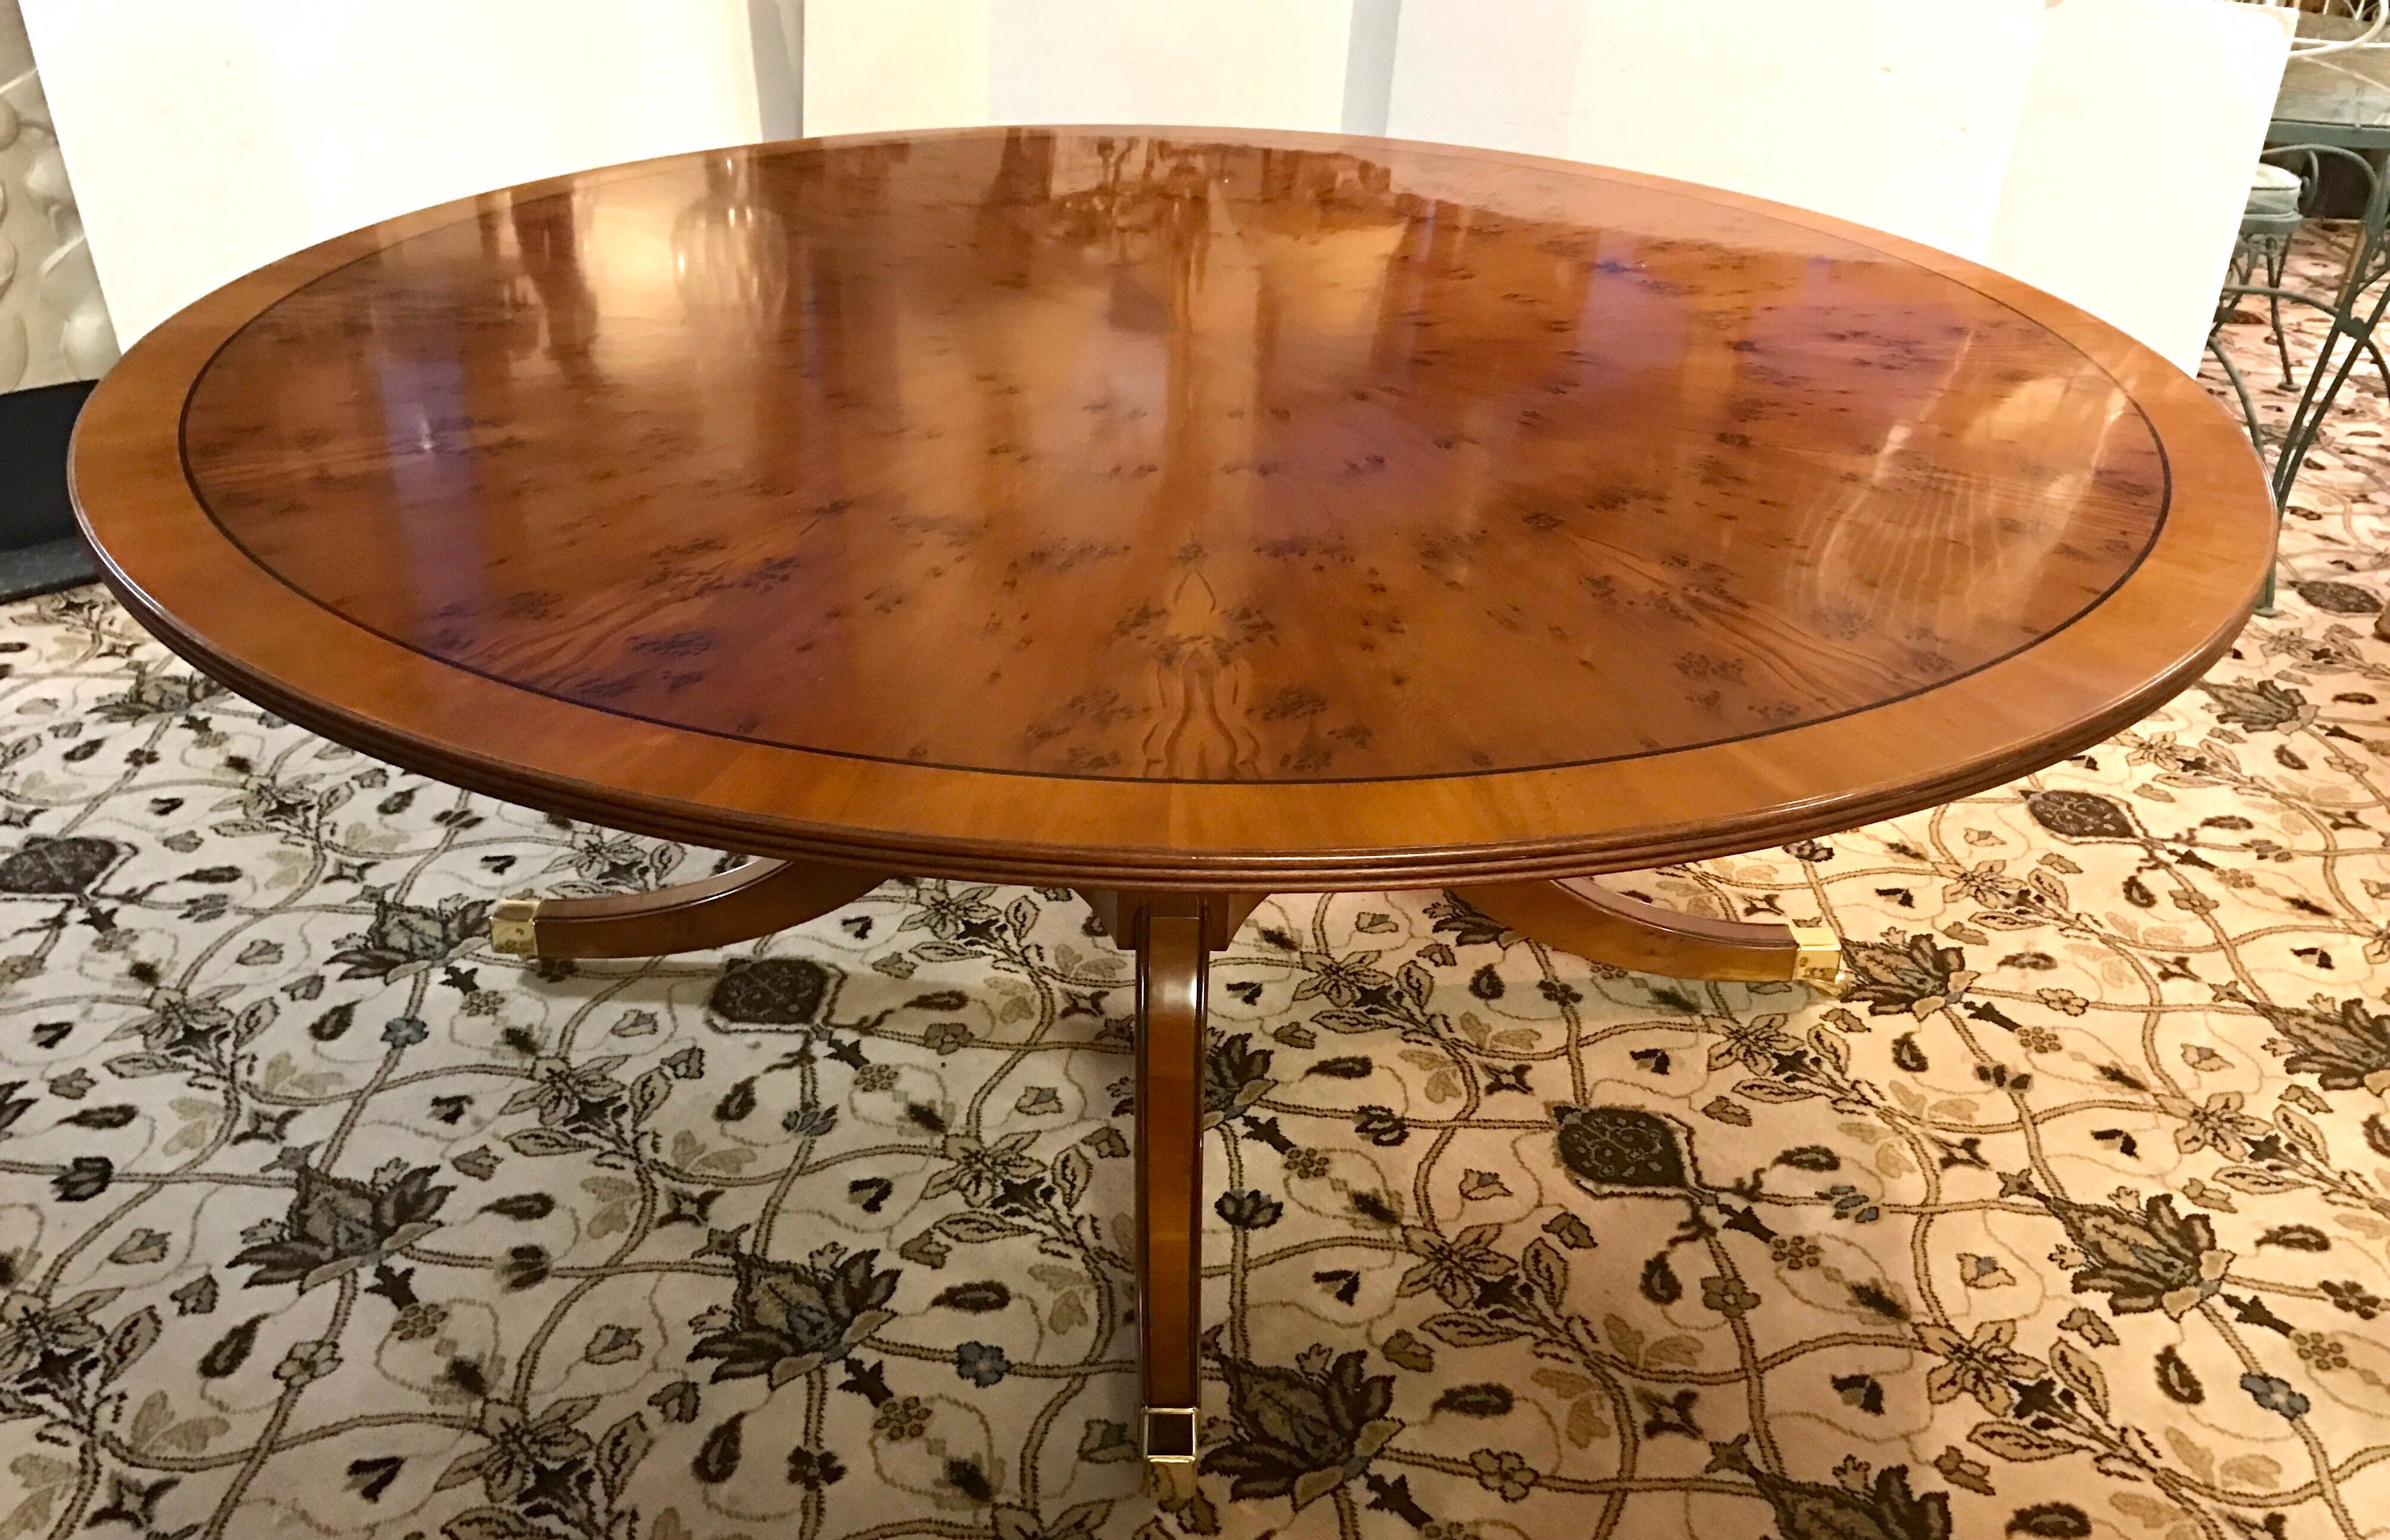 Stunning round yew wood dining table that is marked made in England. Fabulous condition, no leaves, sits up to 10 depending on chairs.